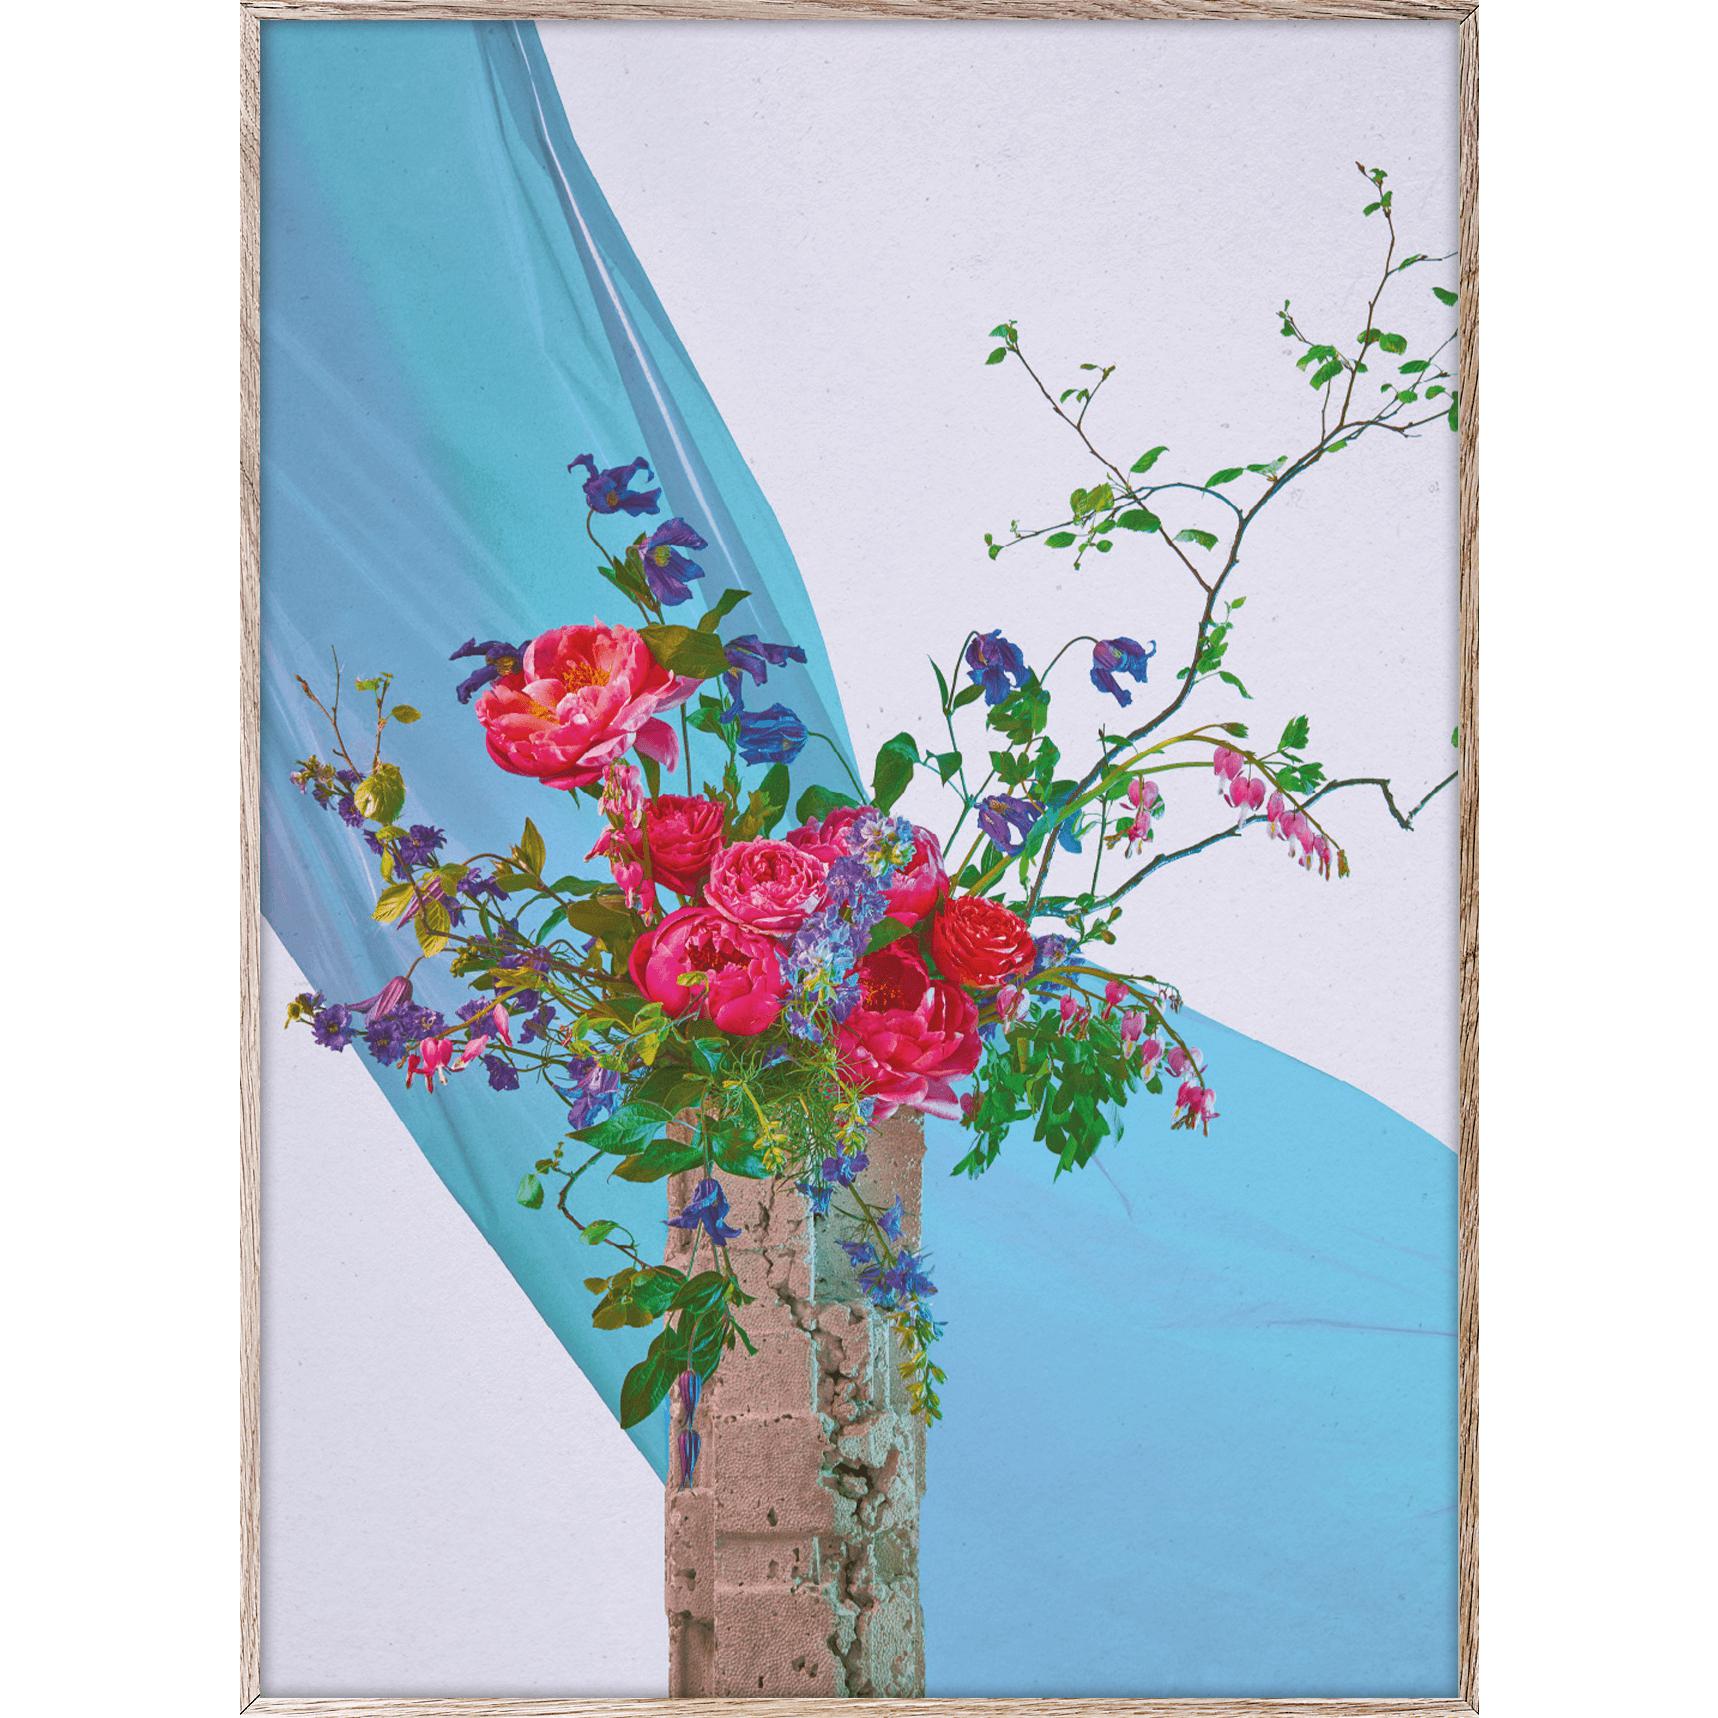 Paper Collective Bloom 05 Affiche 50x70 cm, turquoise